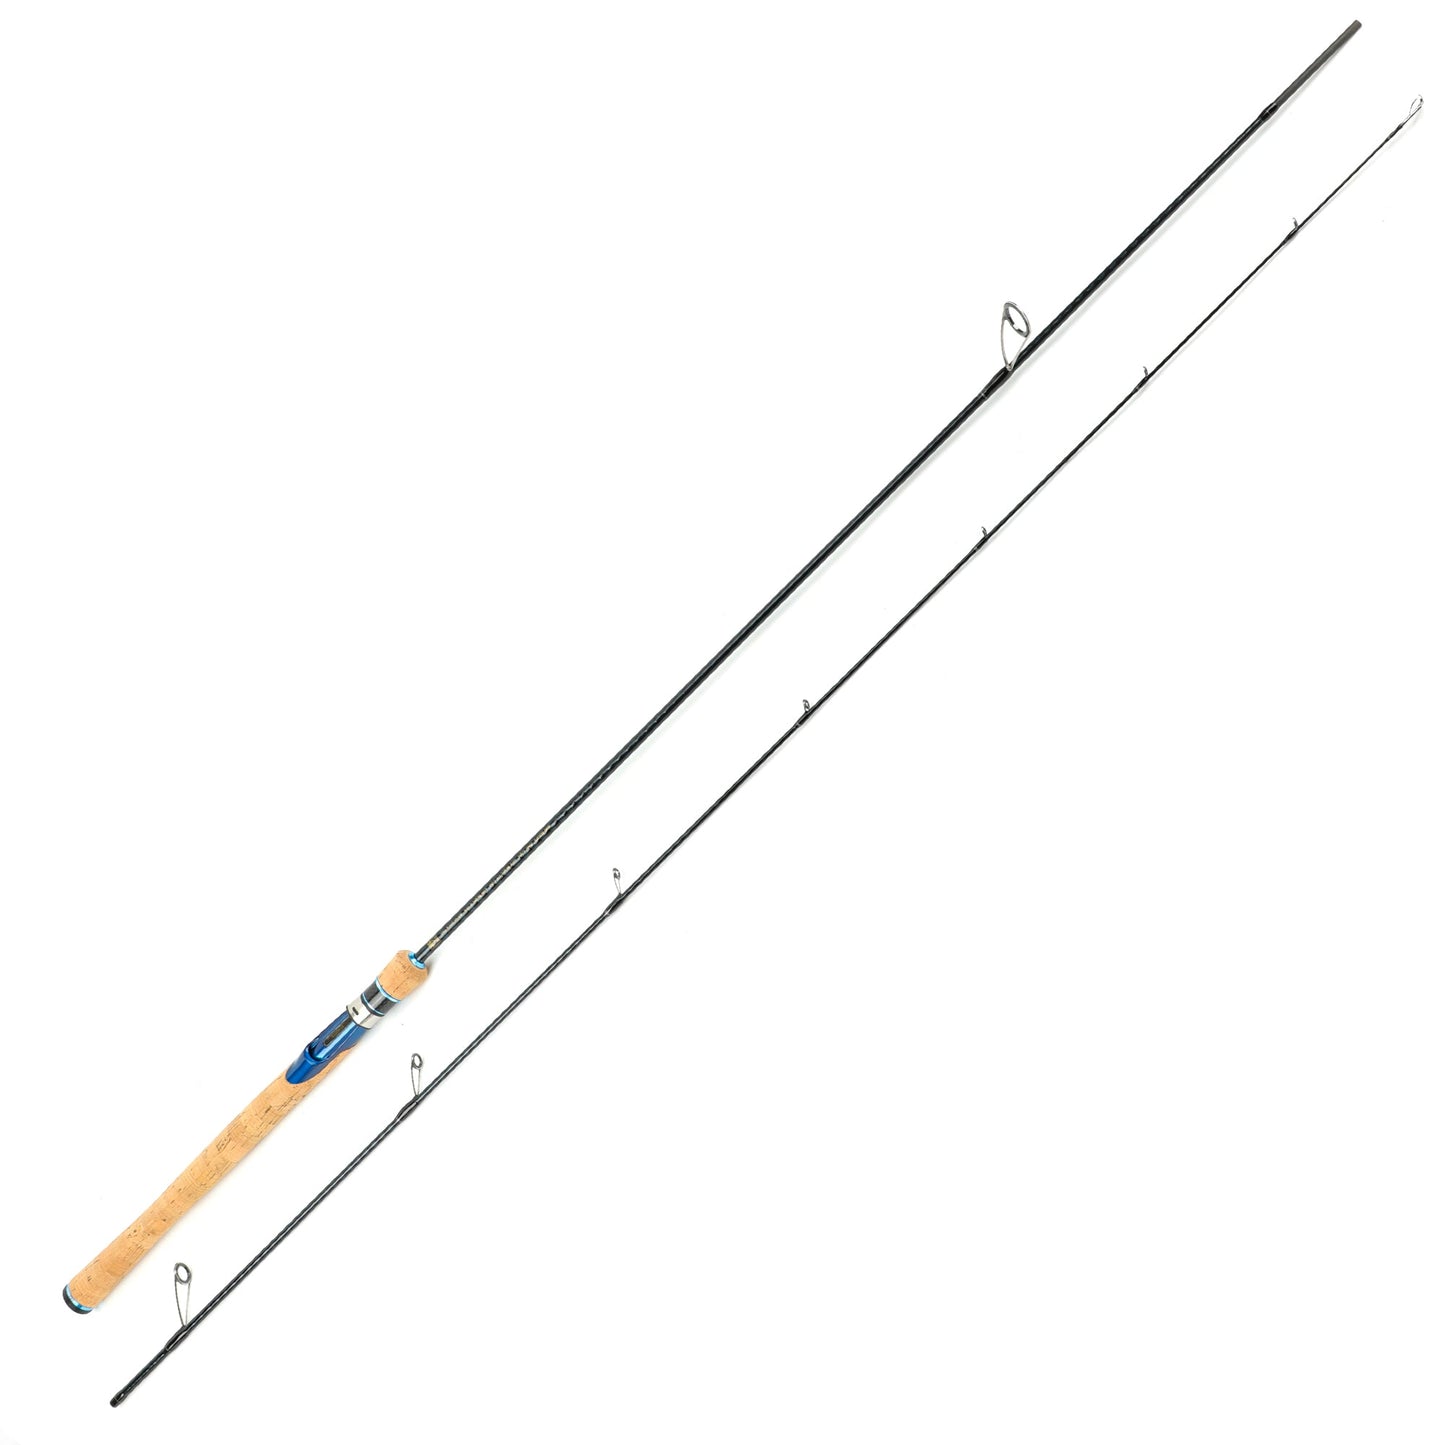 Waterdog 7ft Trout Fishing Rod in 2 sections Light Extra Fast